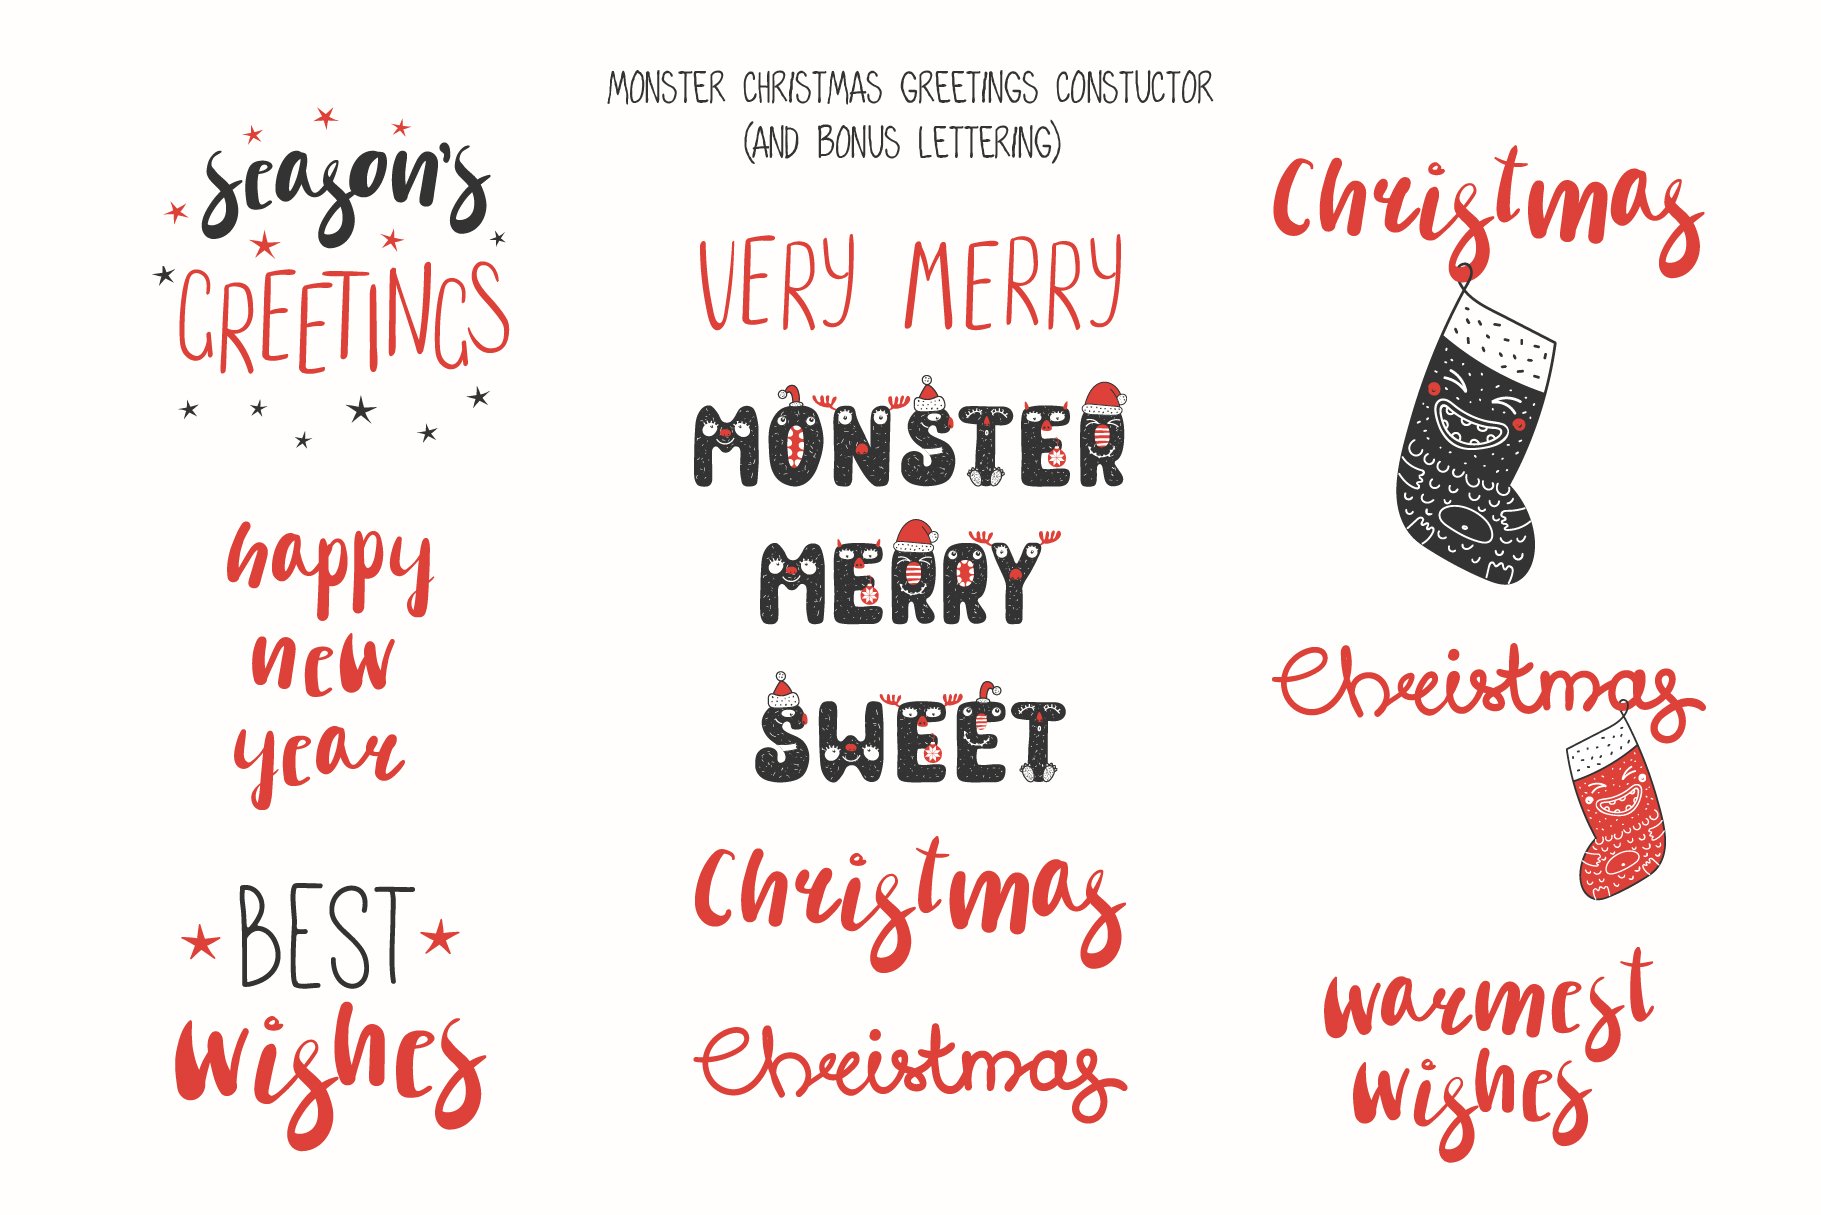 Monster Christmas greetings constructor.